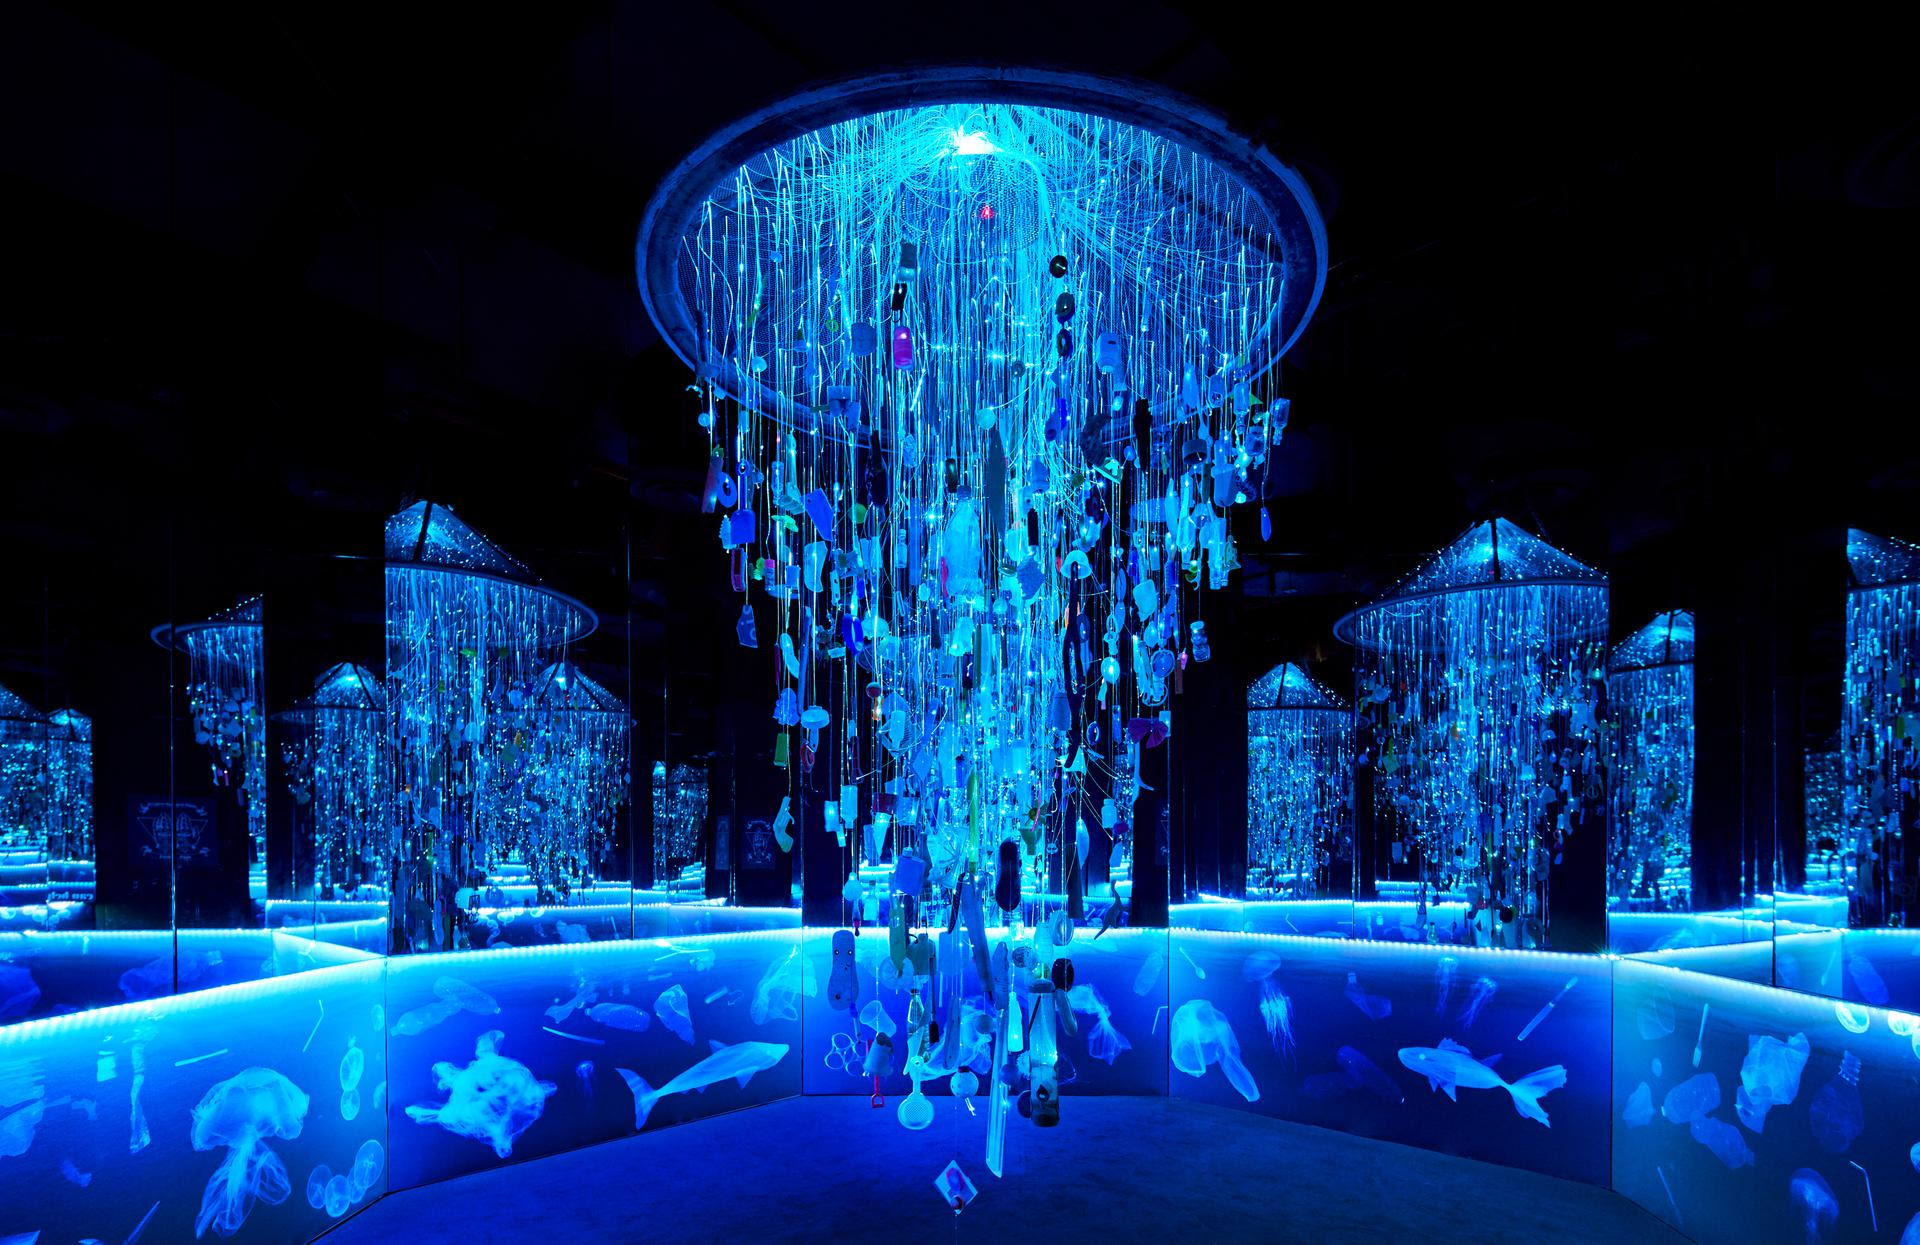 Installation made from glowing jellyfish.